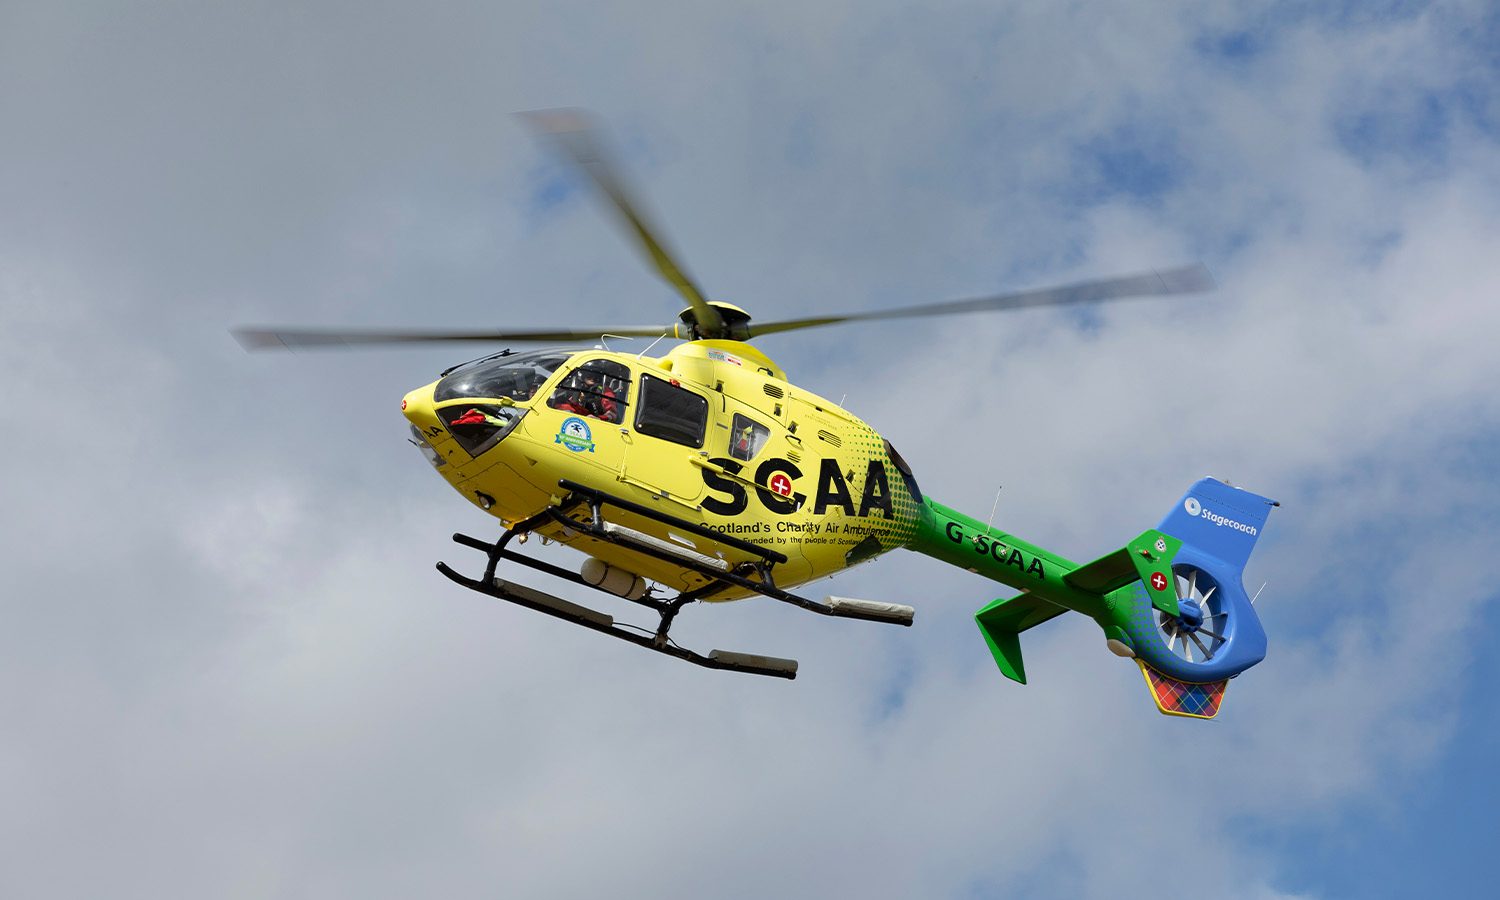 To The Rescue: SCAA chopper sets out on a mission